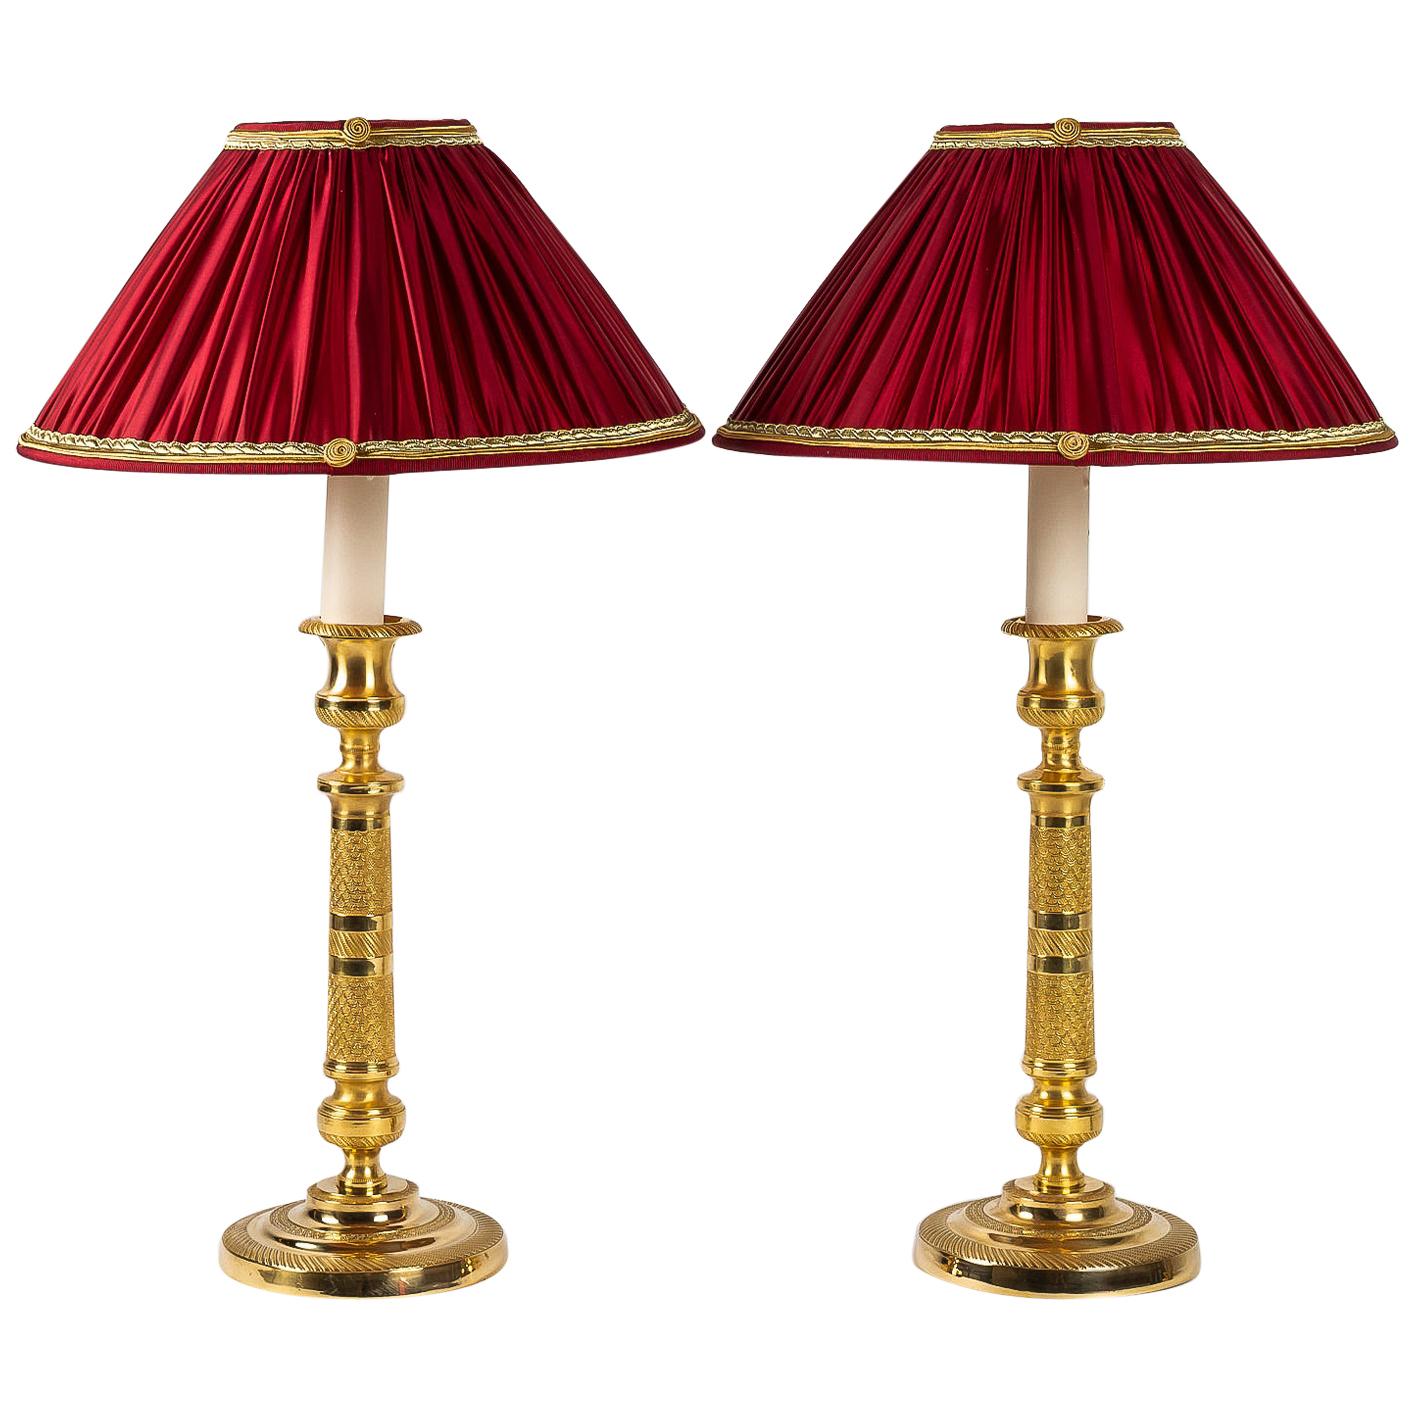 French Empire Period, Pair of Ormolu Candlesticks Converted in Table Lamps